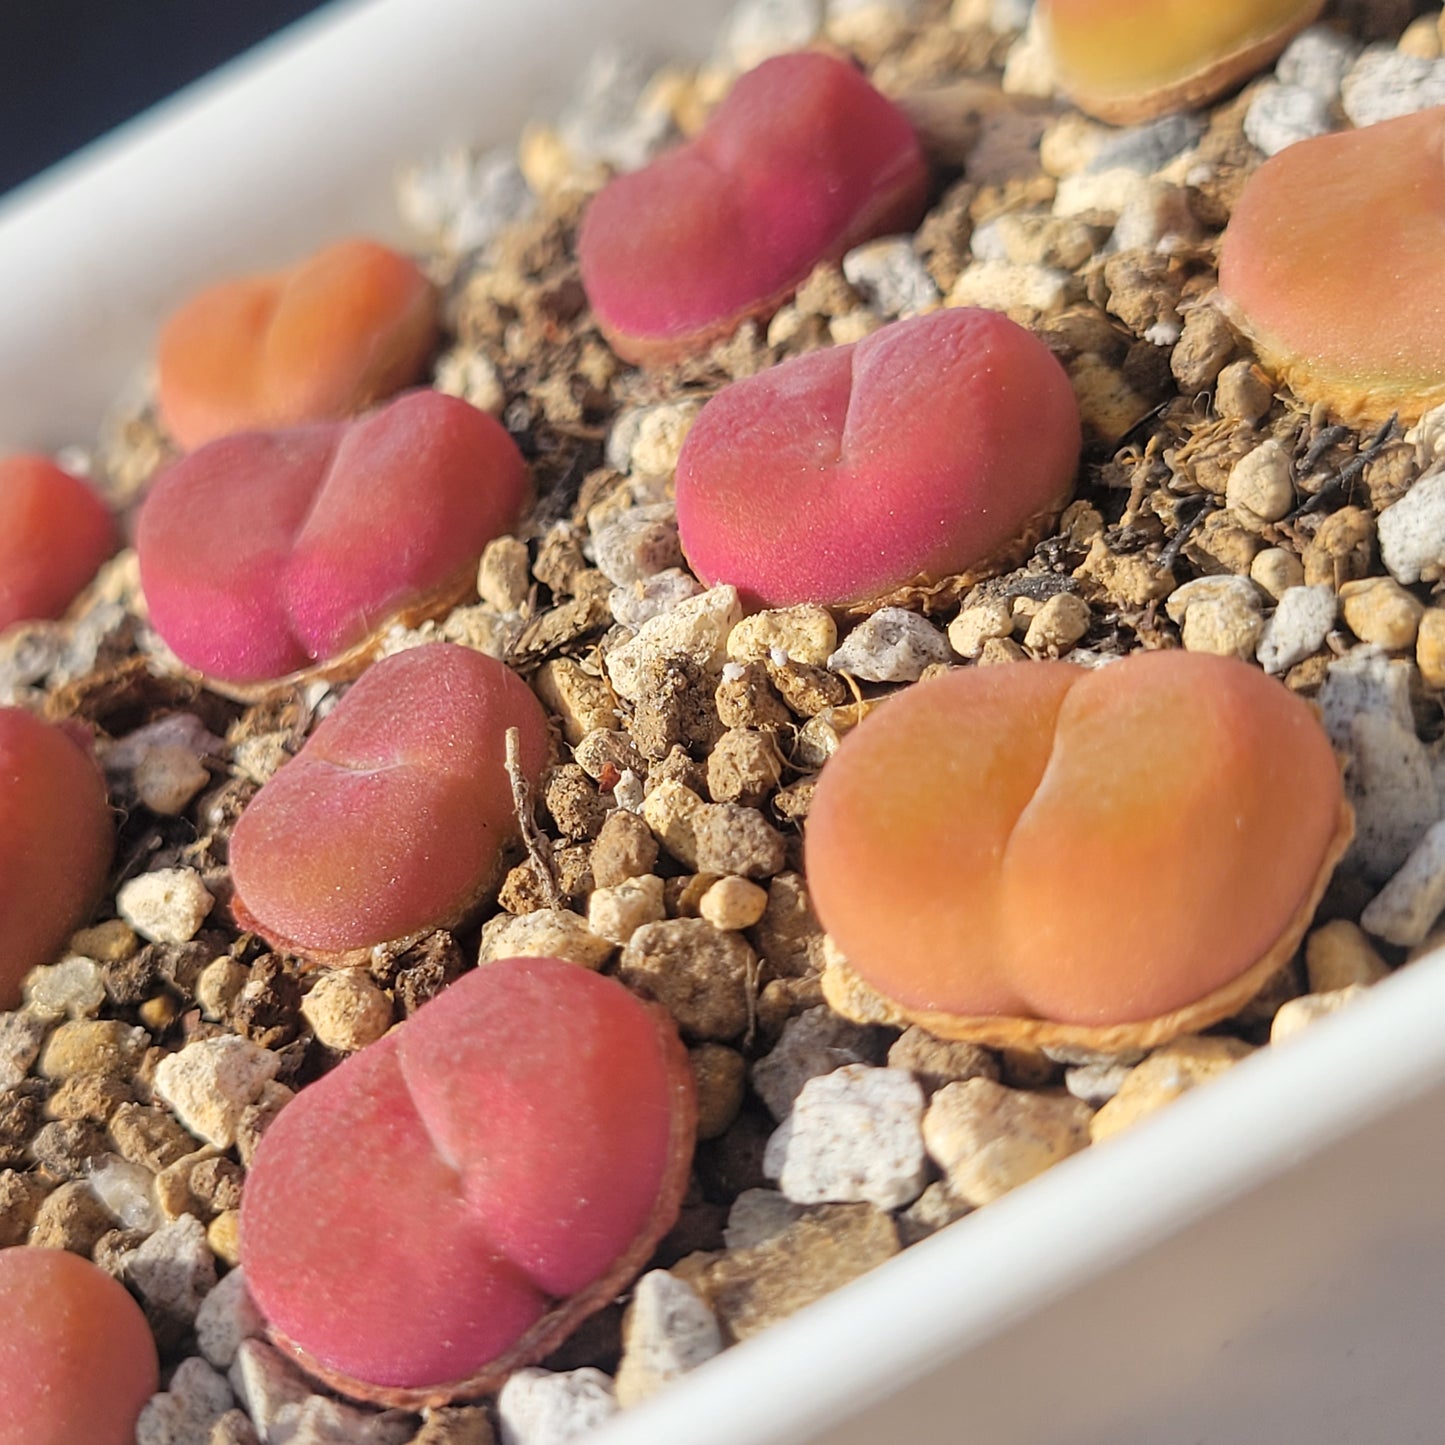 Conophytum Maughanii MG#1801.1 "Flat Peach" Mother Plants